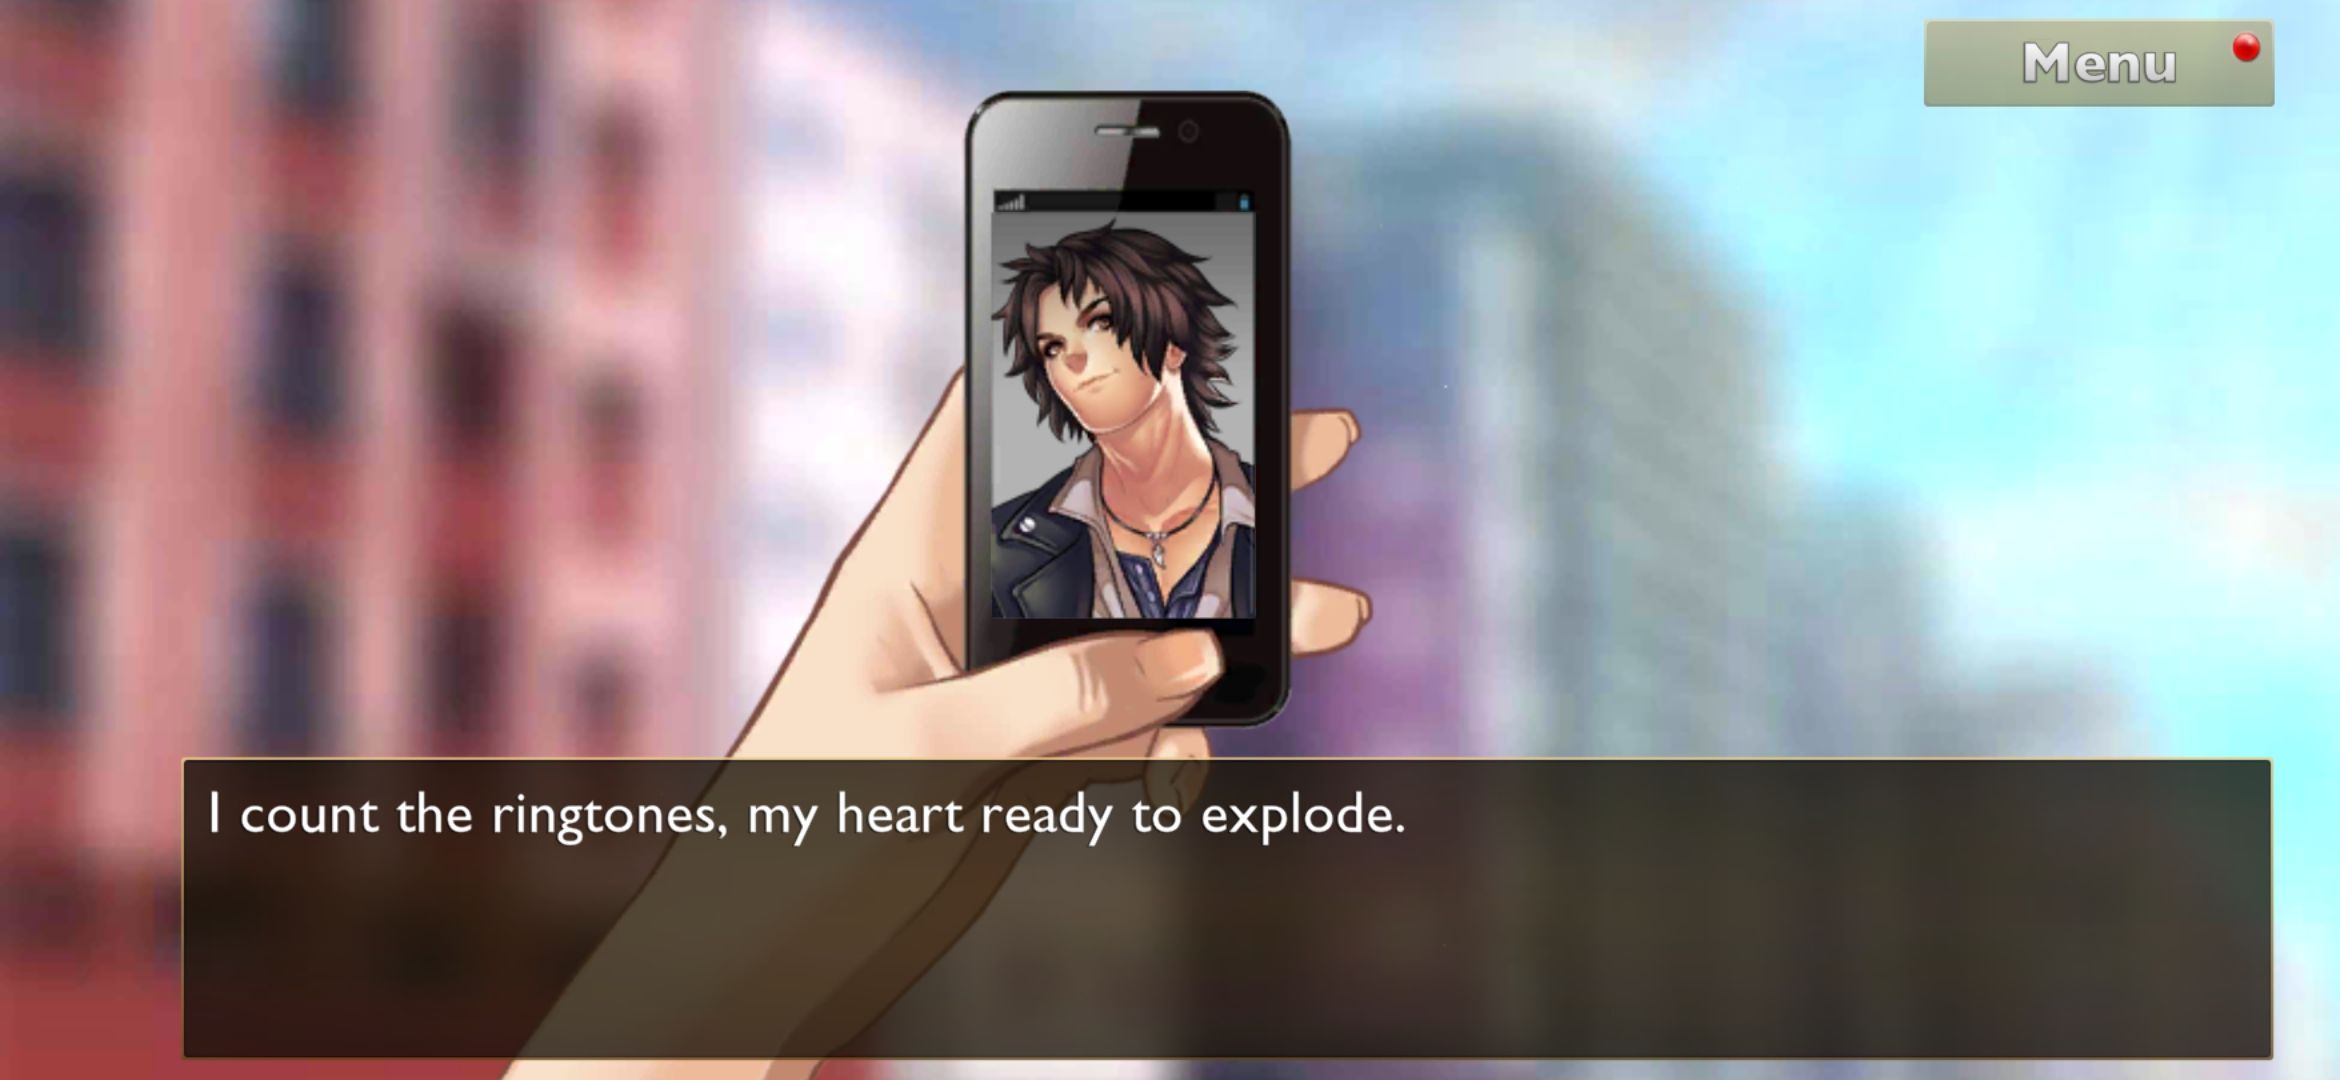 Is It Love? Daryl - Virtual Boyfriend for Android